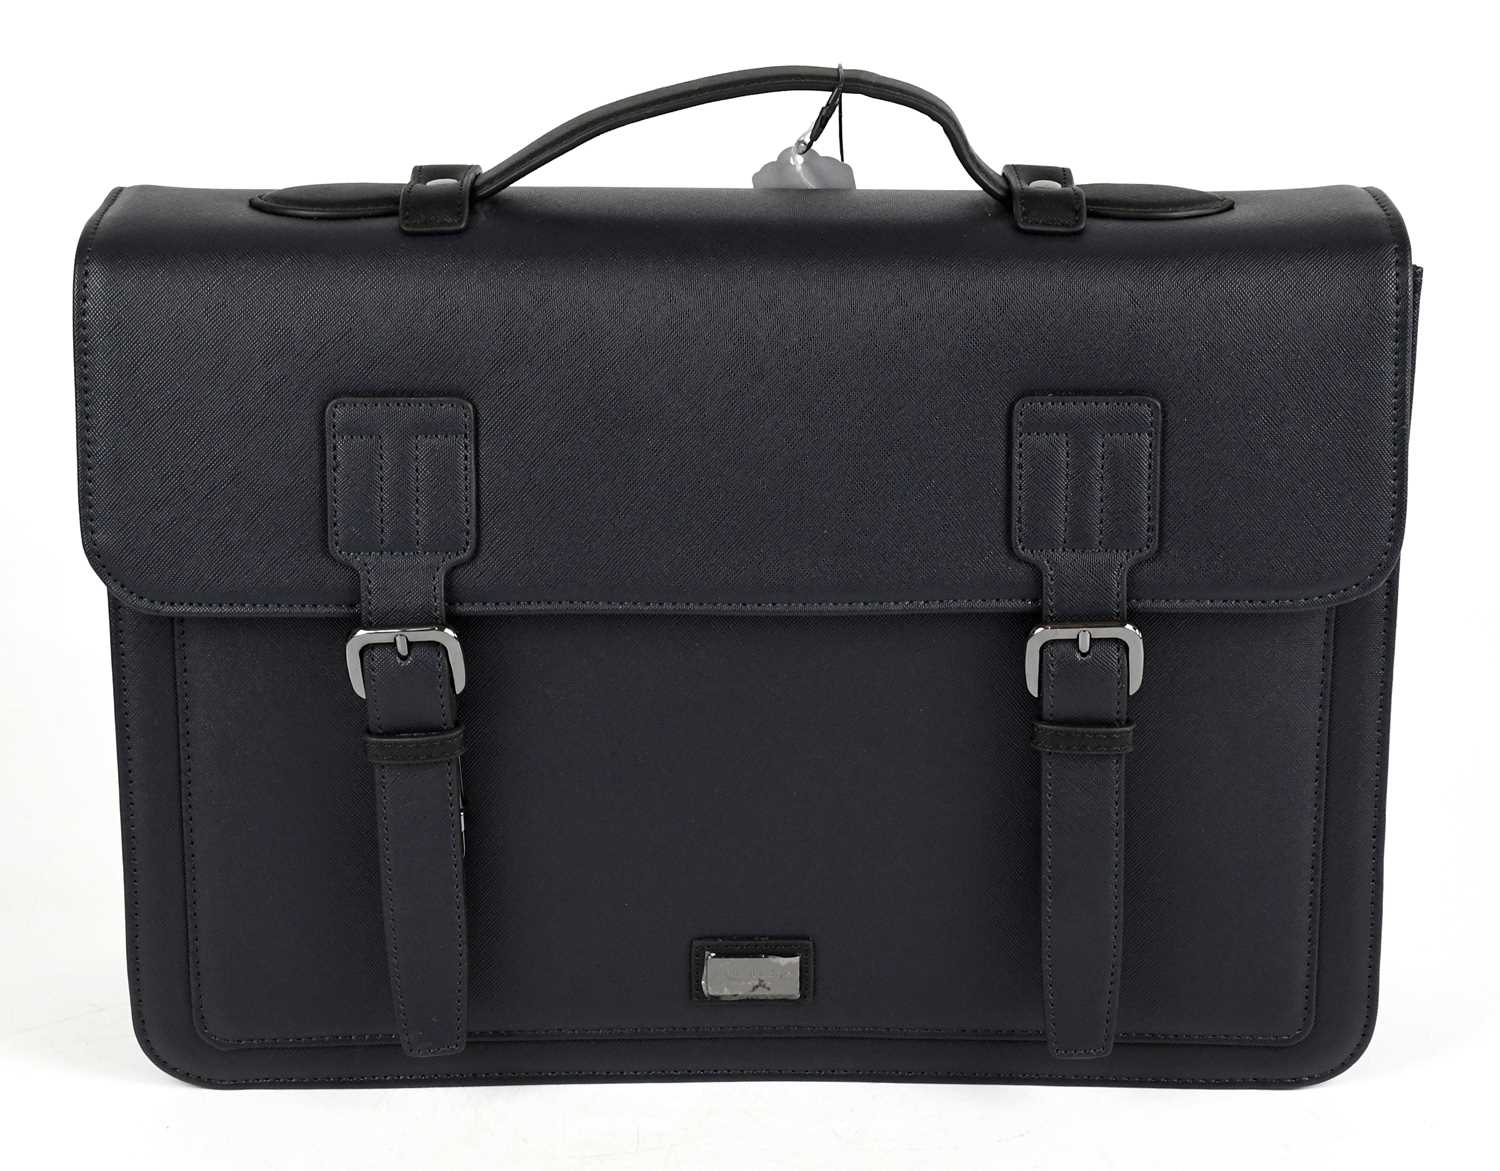 TED BAKER; an unused navy blue faux leather satchel, with front flap and two silver tone buckle